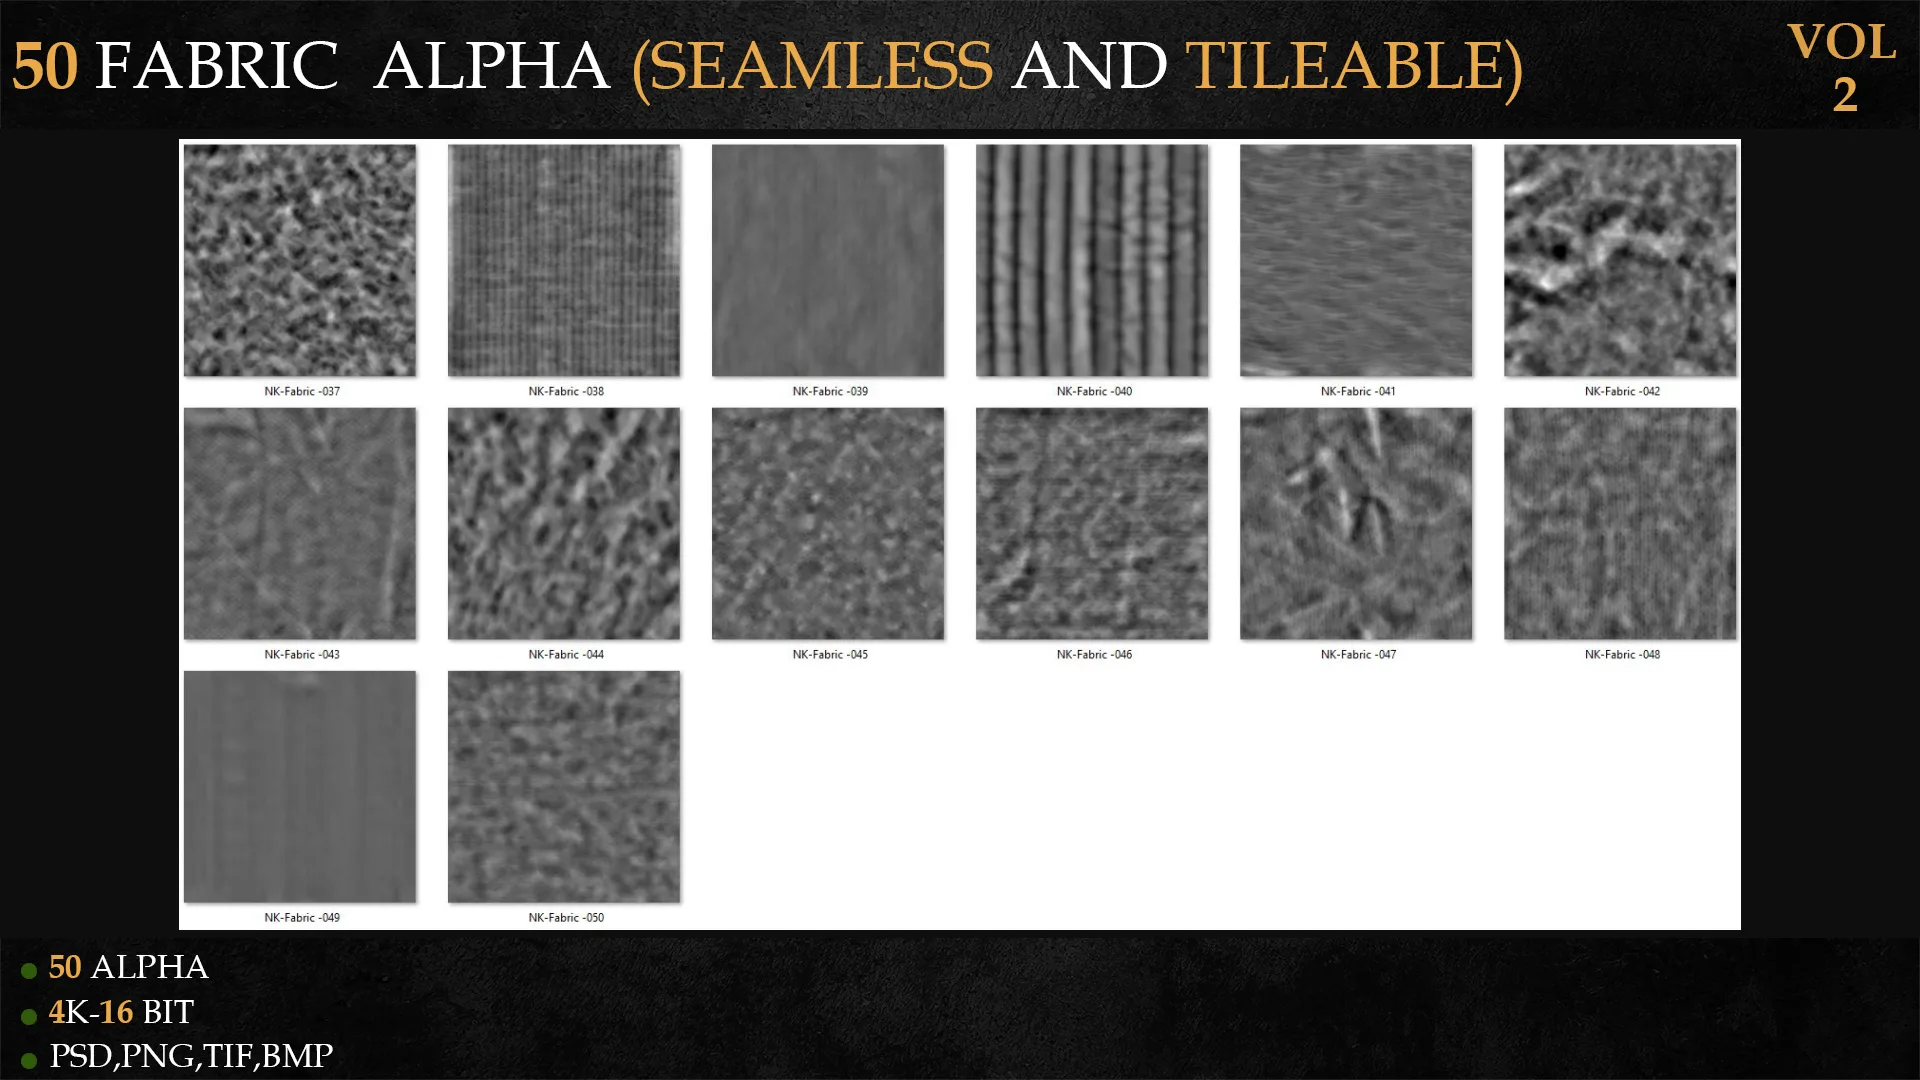 50 FABRIC ALPHA (SEAMLESS AND TILEABLE)-VOL 2